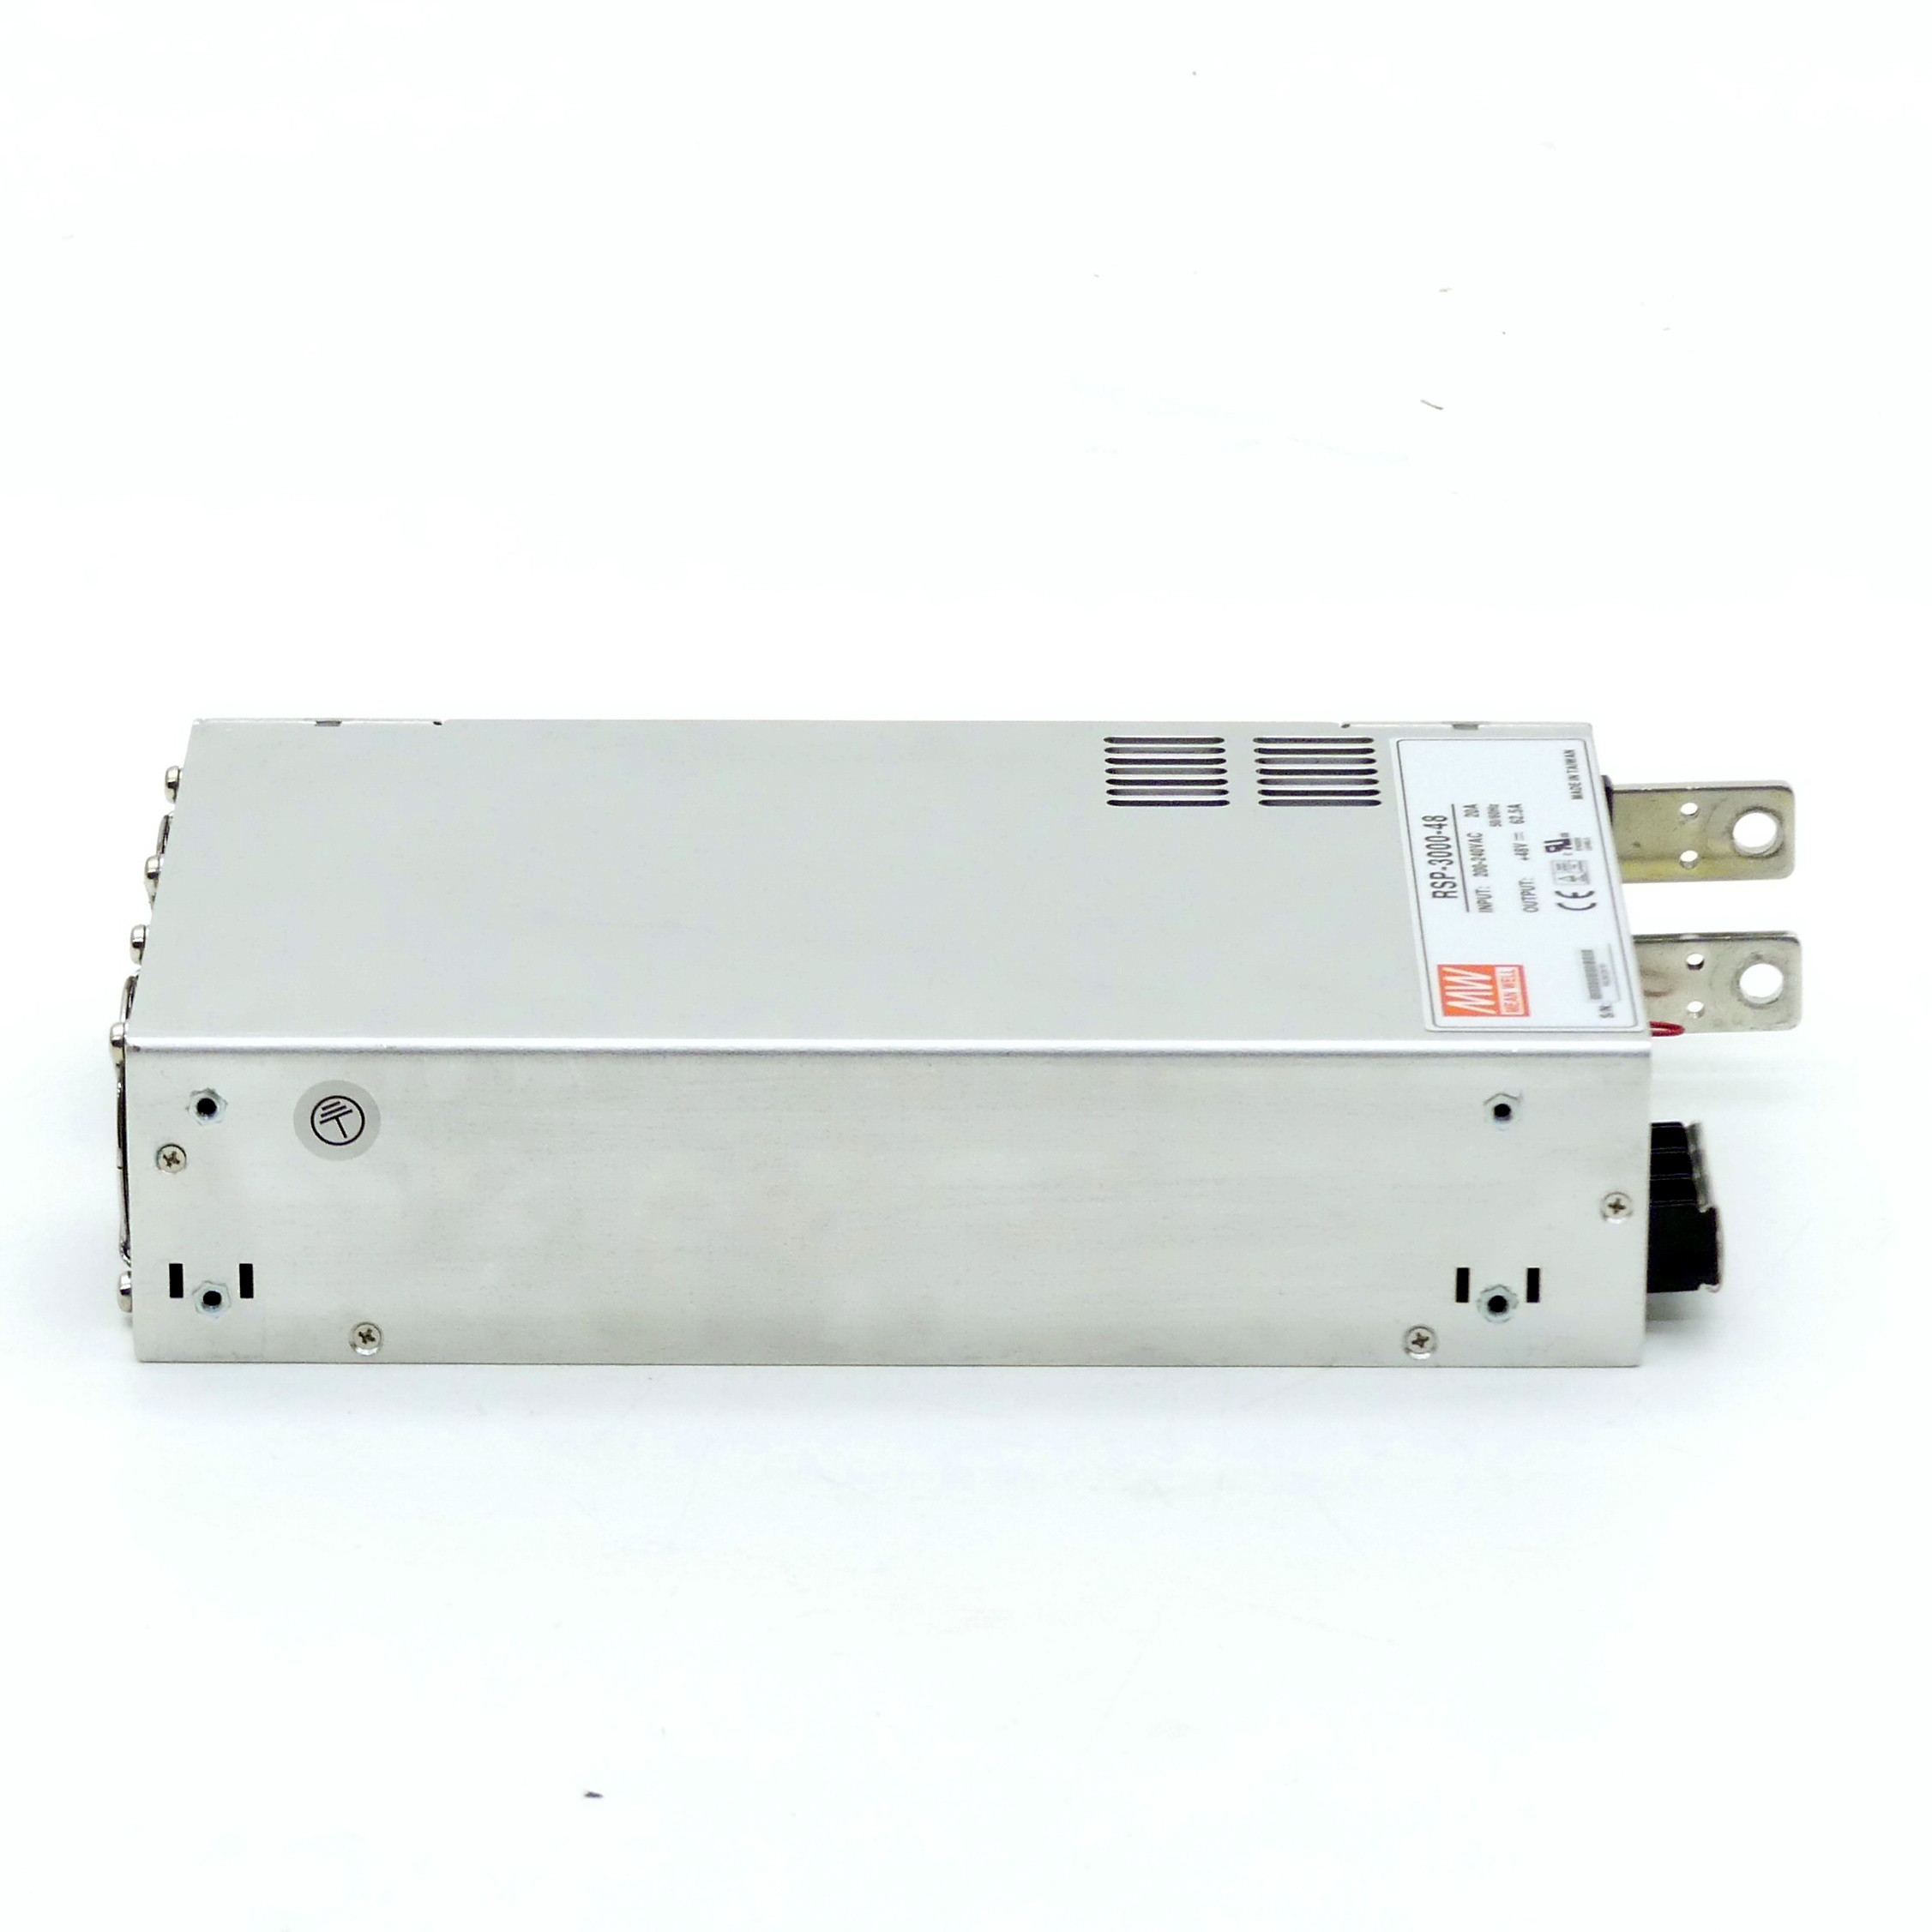 Switching power supply RSP-3000-48 